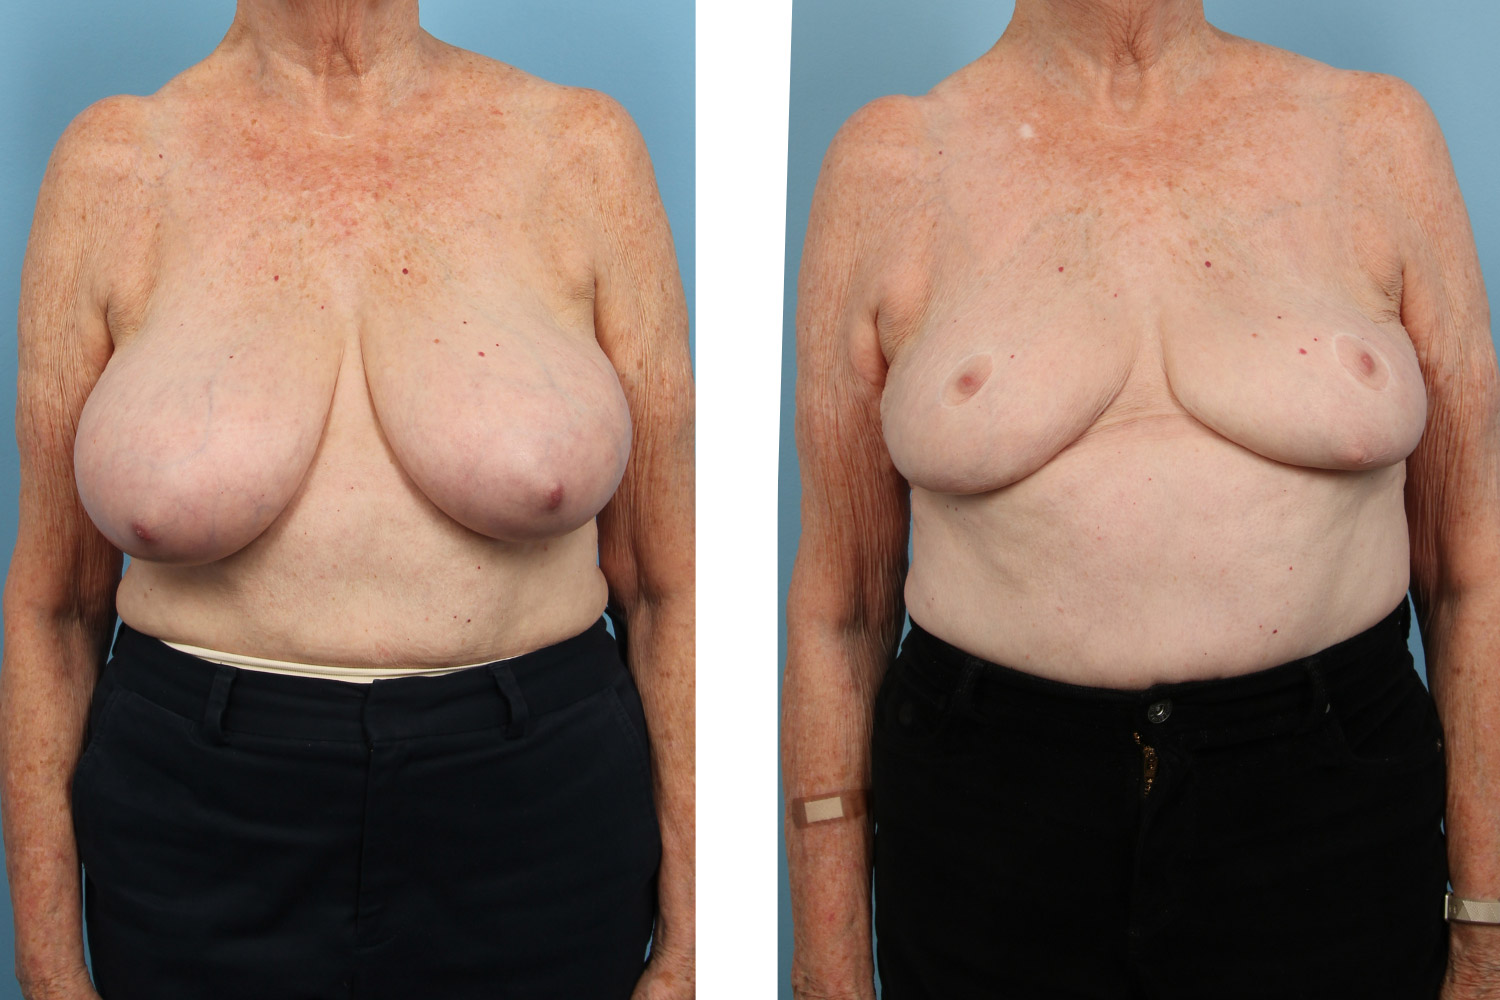 Breast reduction on a 75-year-old woman